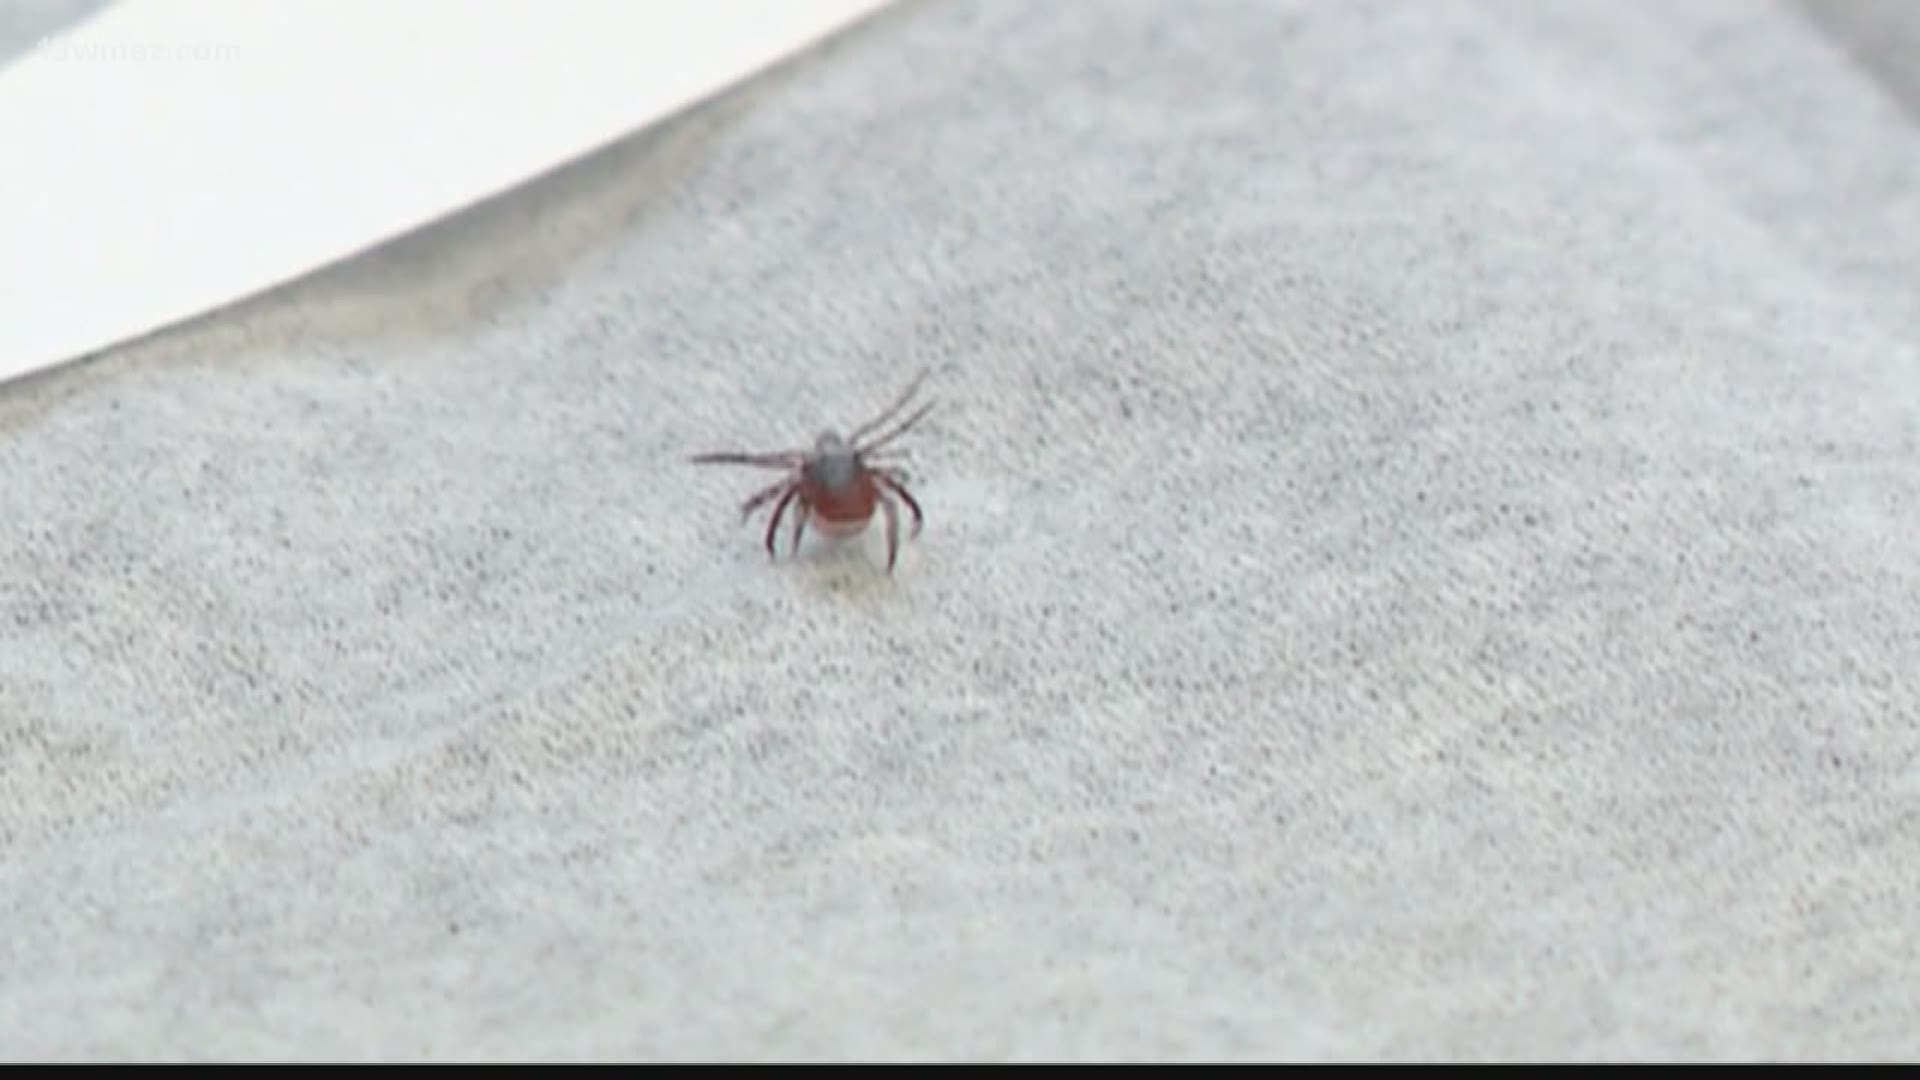 VERIFY: What is the proper way to remove ticks?